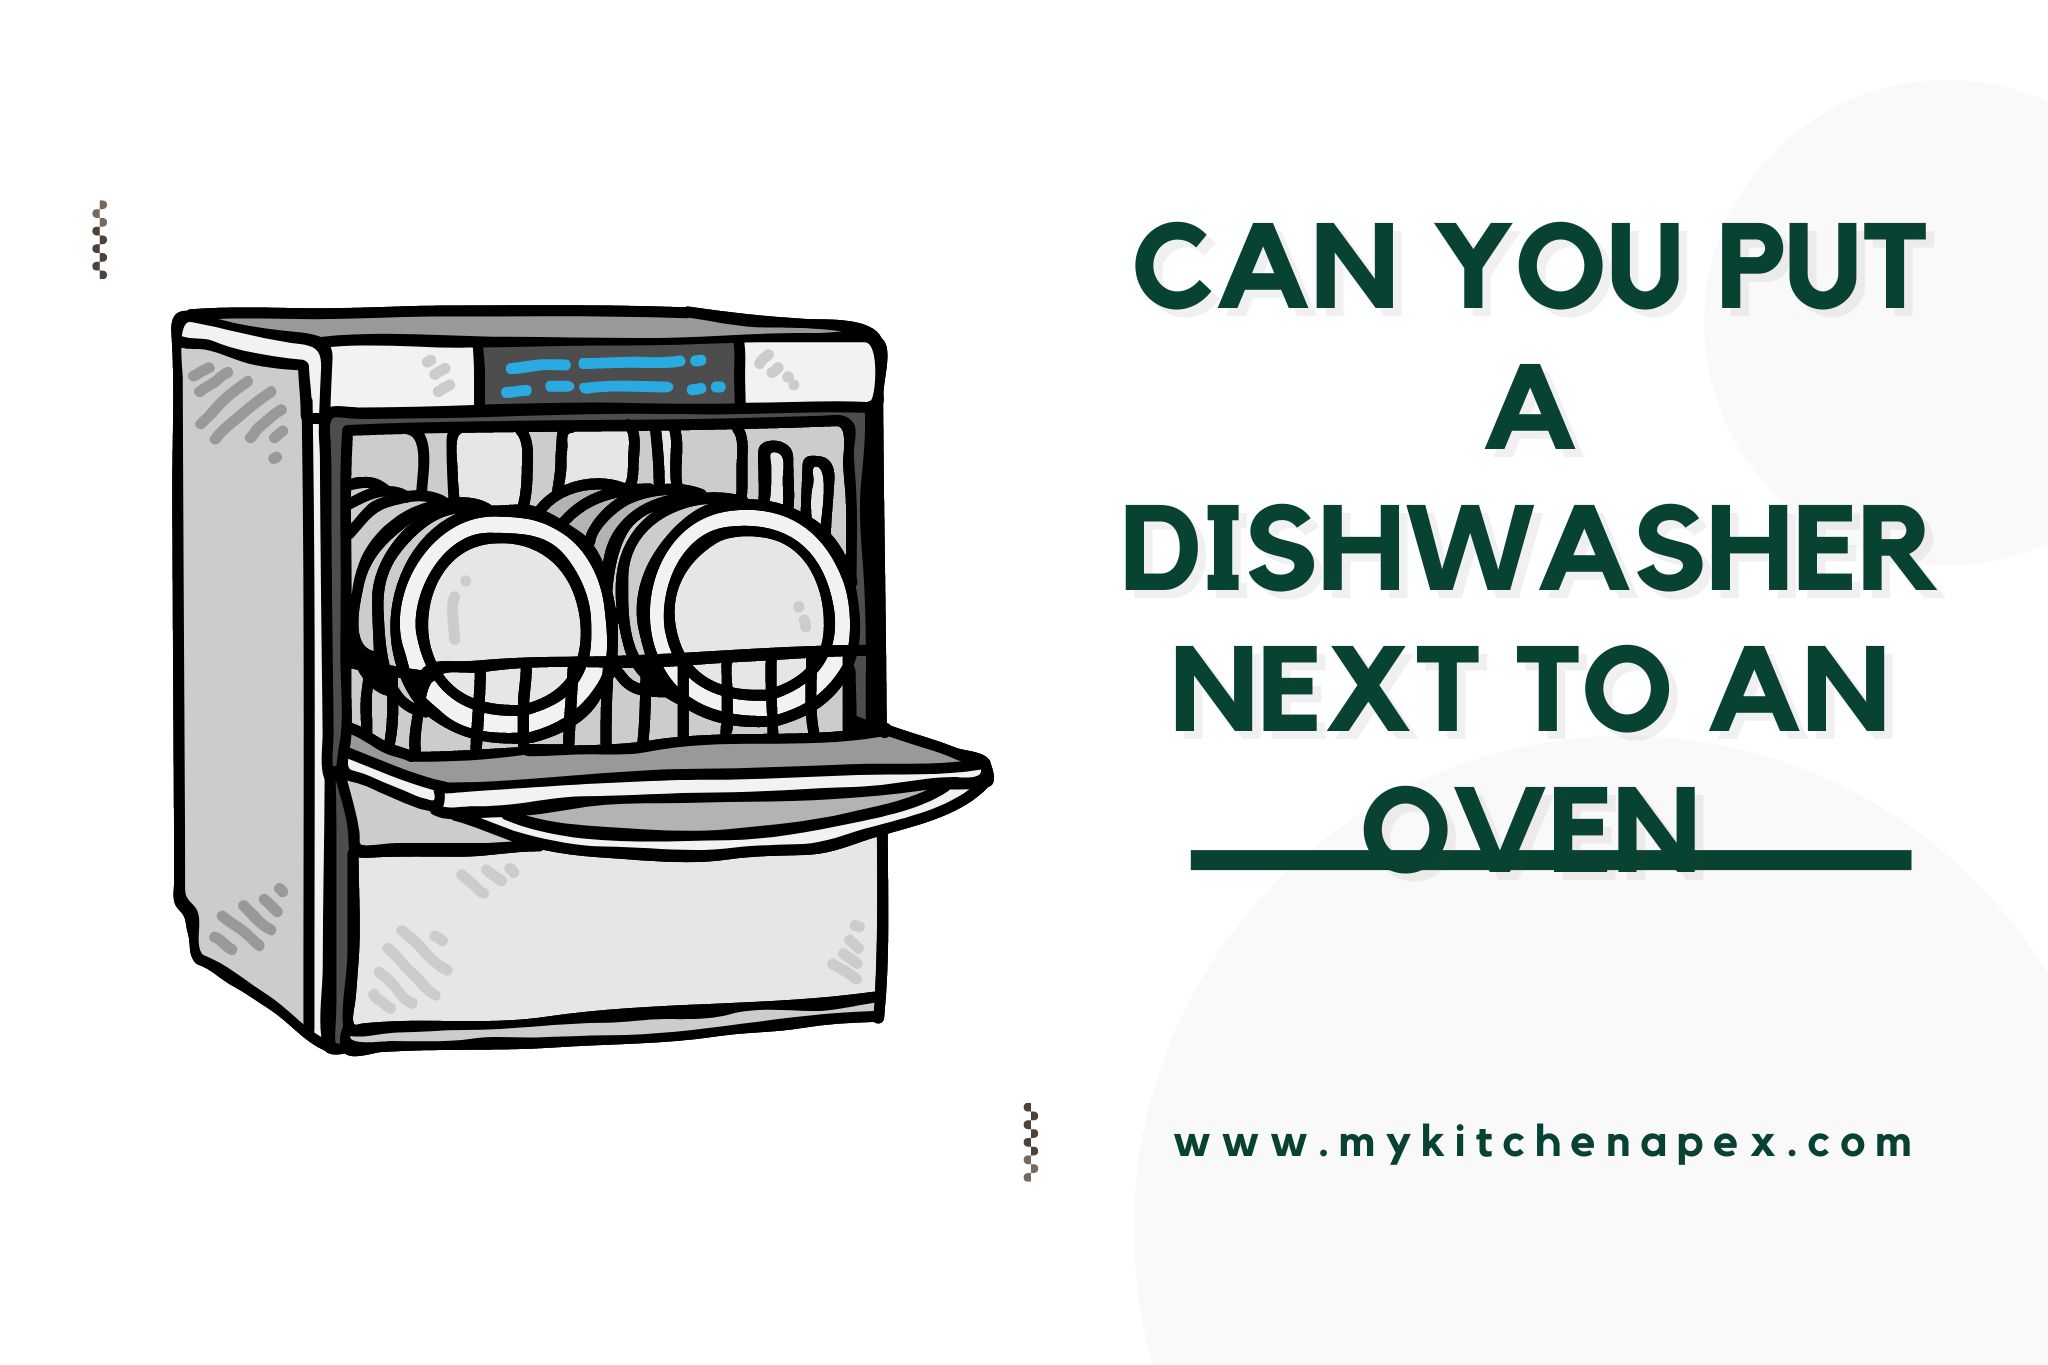 can you put a dishwasher next to an oven